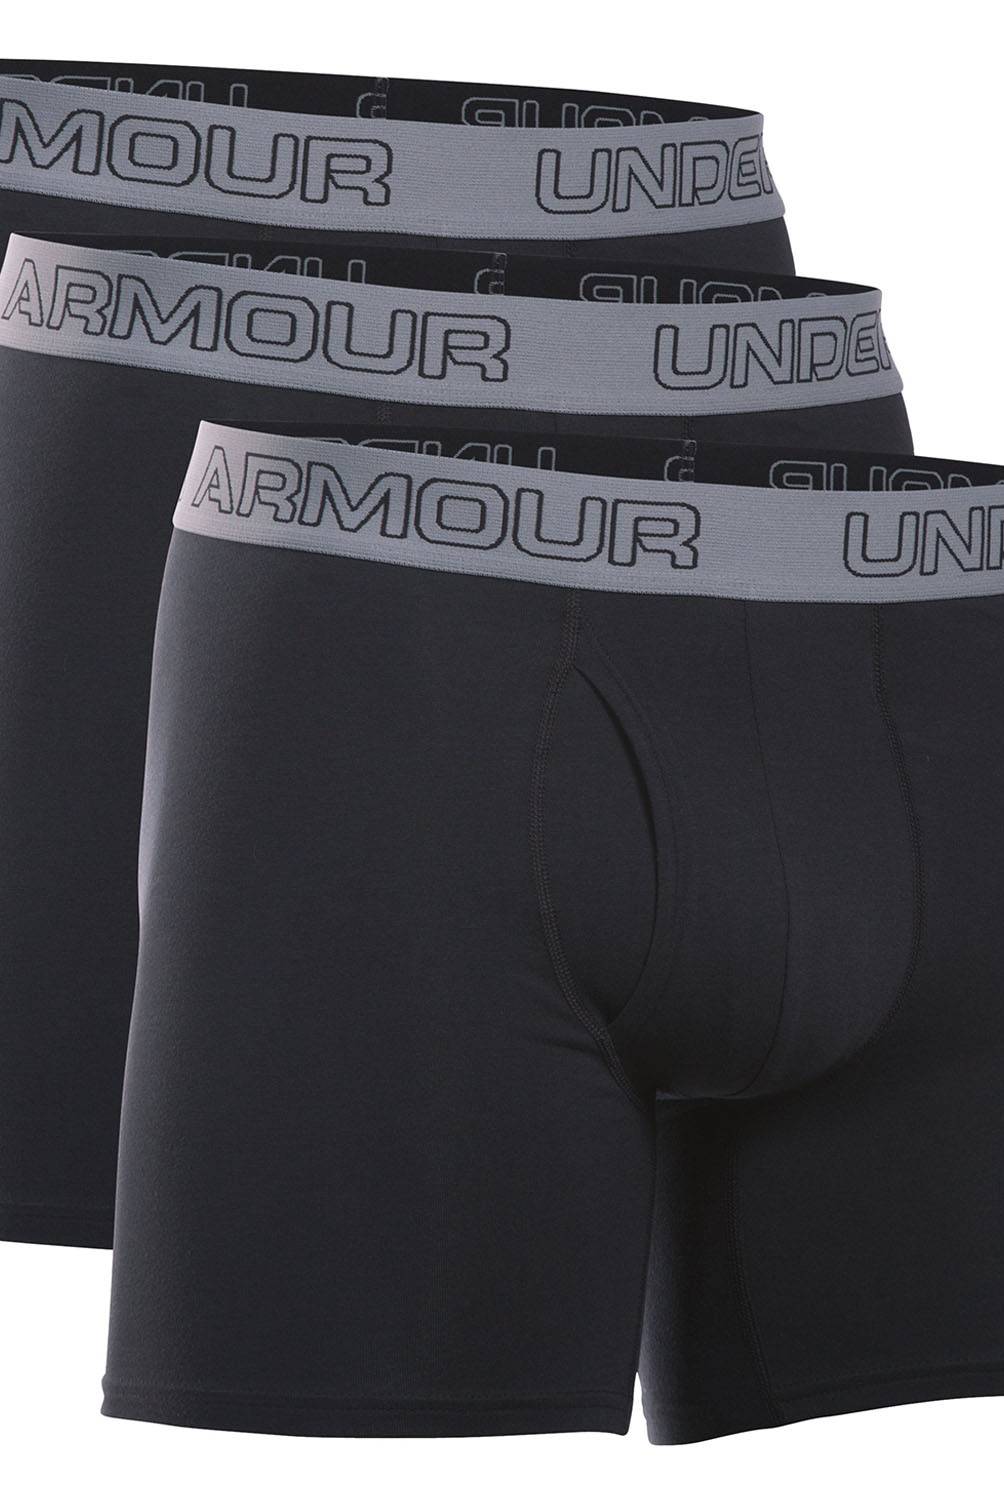 Under Armour - Pack Boxer Liso